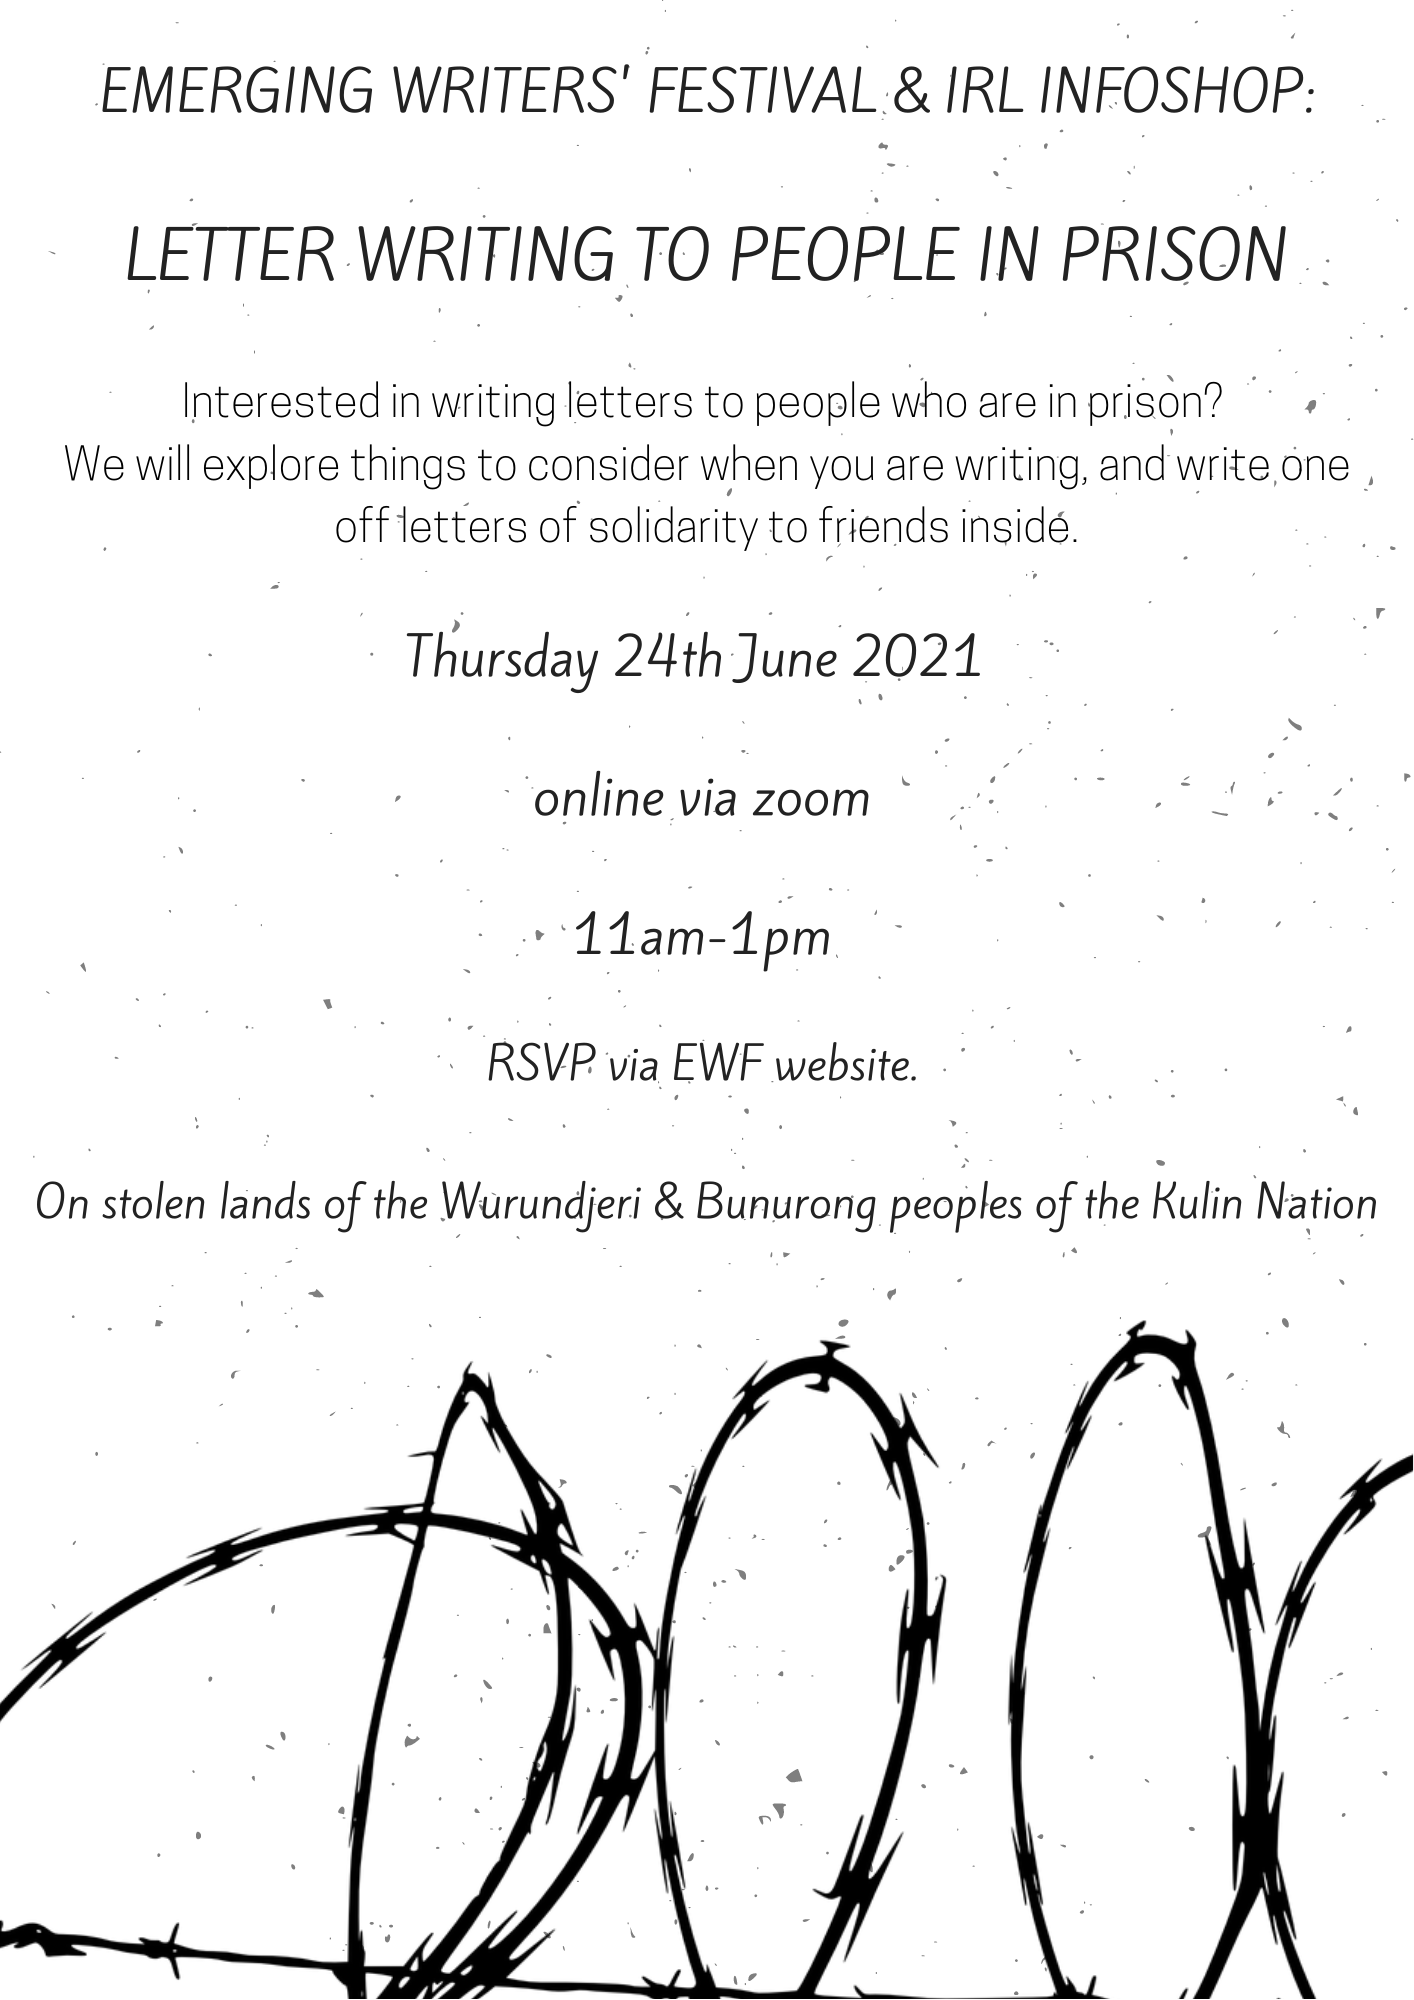 Letter Writing for People in Prison flyer